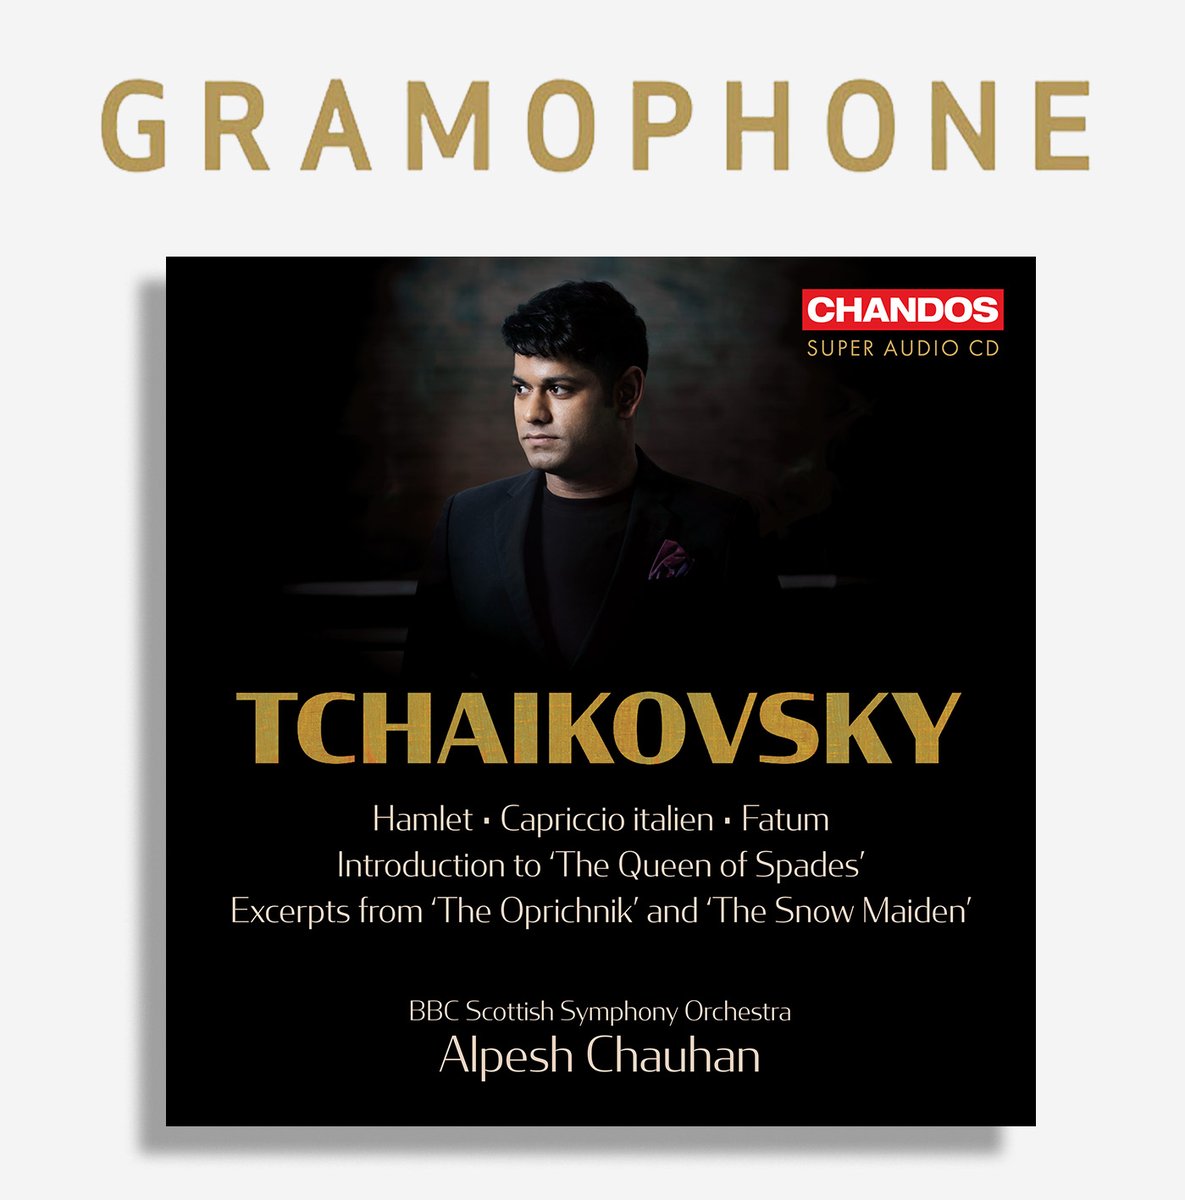 New release from @alpeshconductor @BBCSSO, Tchaikovsky Orchestral Works Vol. 2 is out now! ✨💿 '...this further exploration of Tchaikovsky's orchestral works and operas is a delight for the audiophile...Alpesh Chauhan's conducting is perfectionist...' 👉tinyurl.com/ytz87d8m